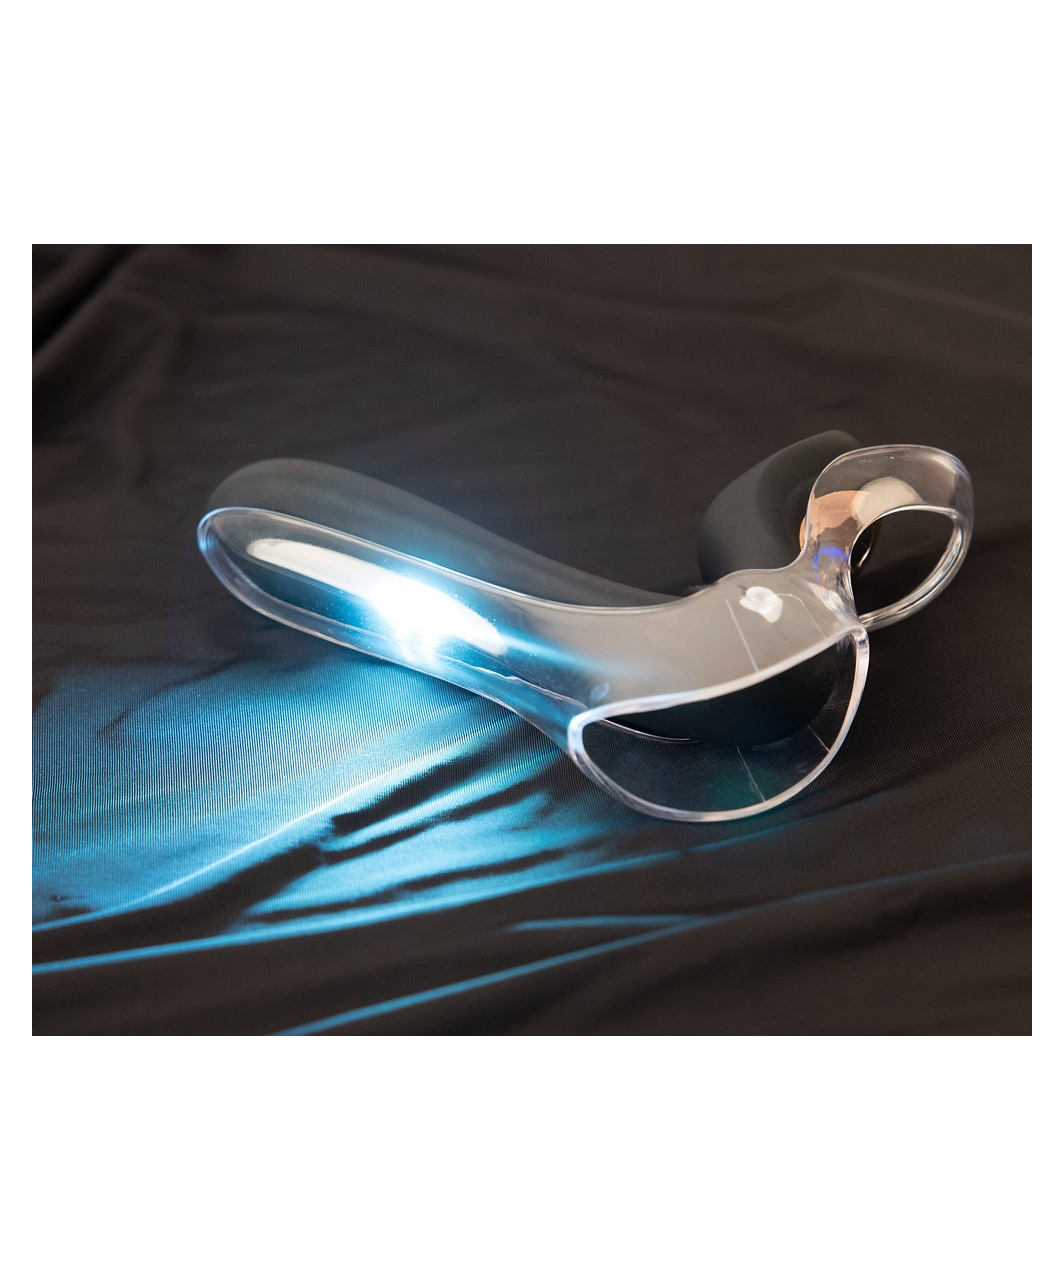 Bad Kitty vibrating speculum with LED light